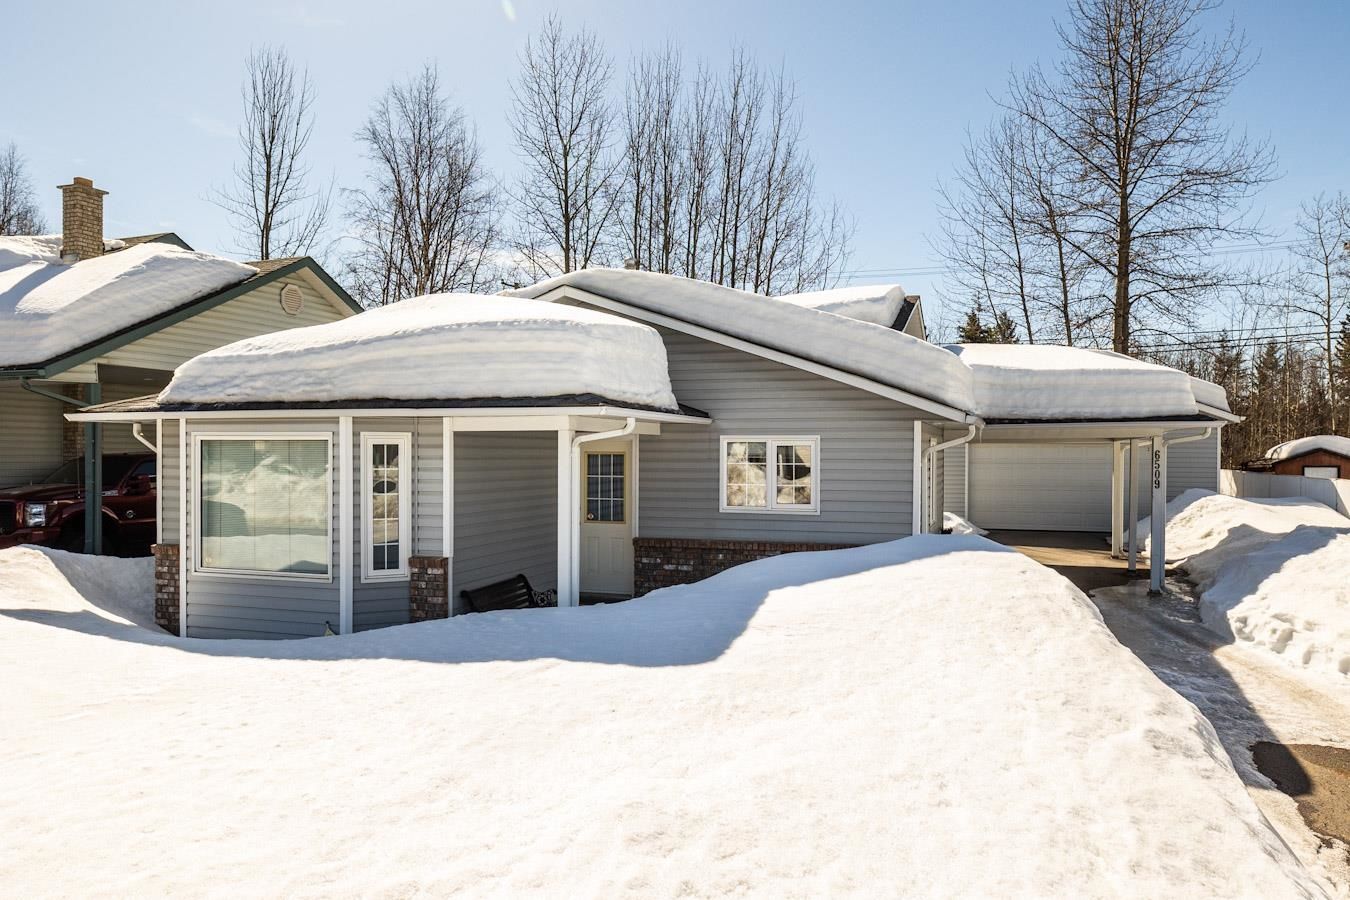 New property listed in Valleyview, PG City North